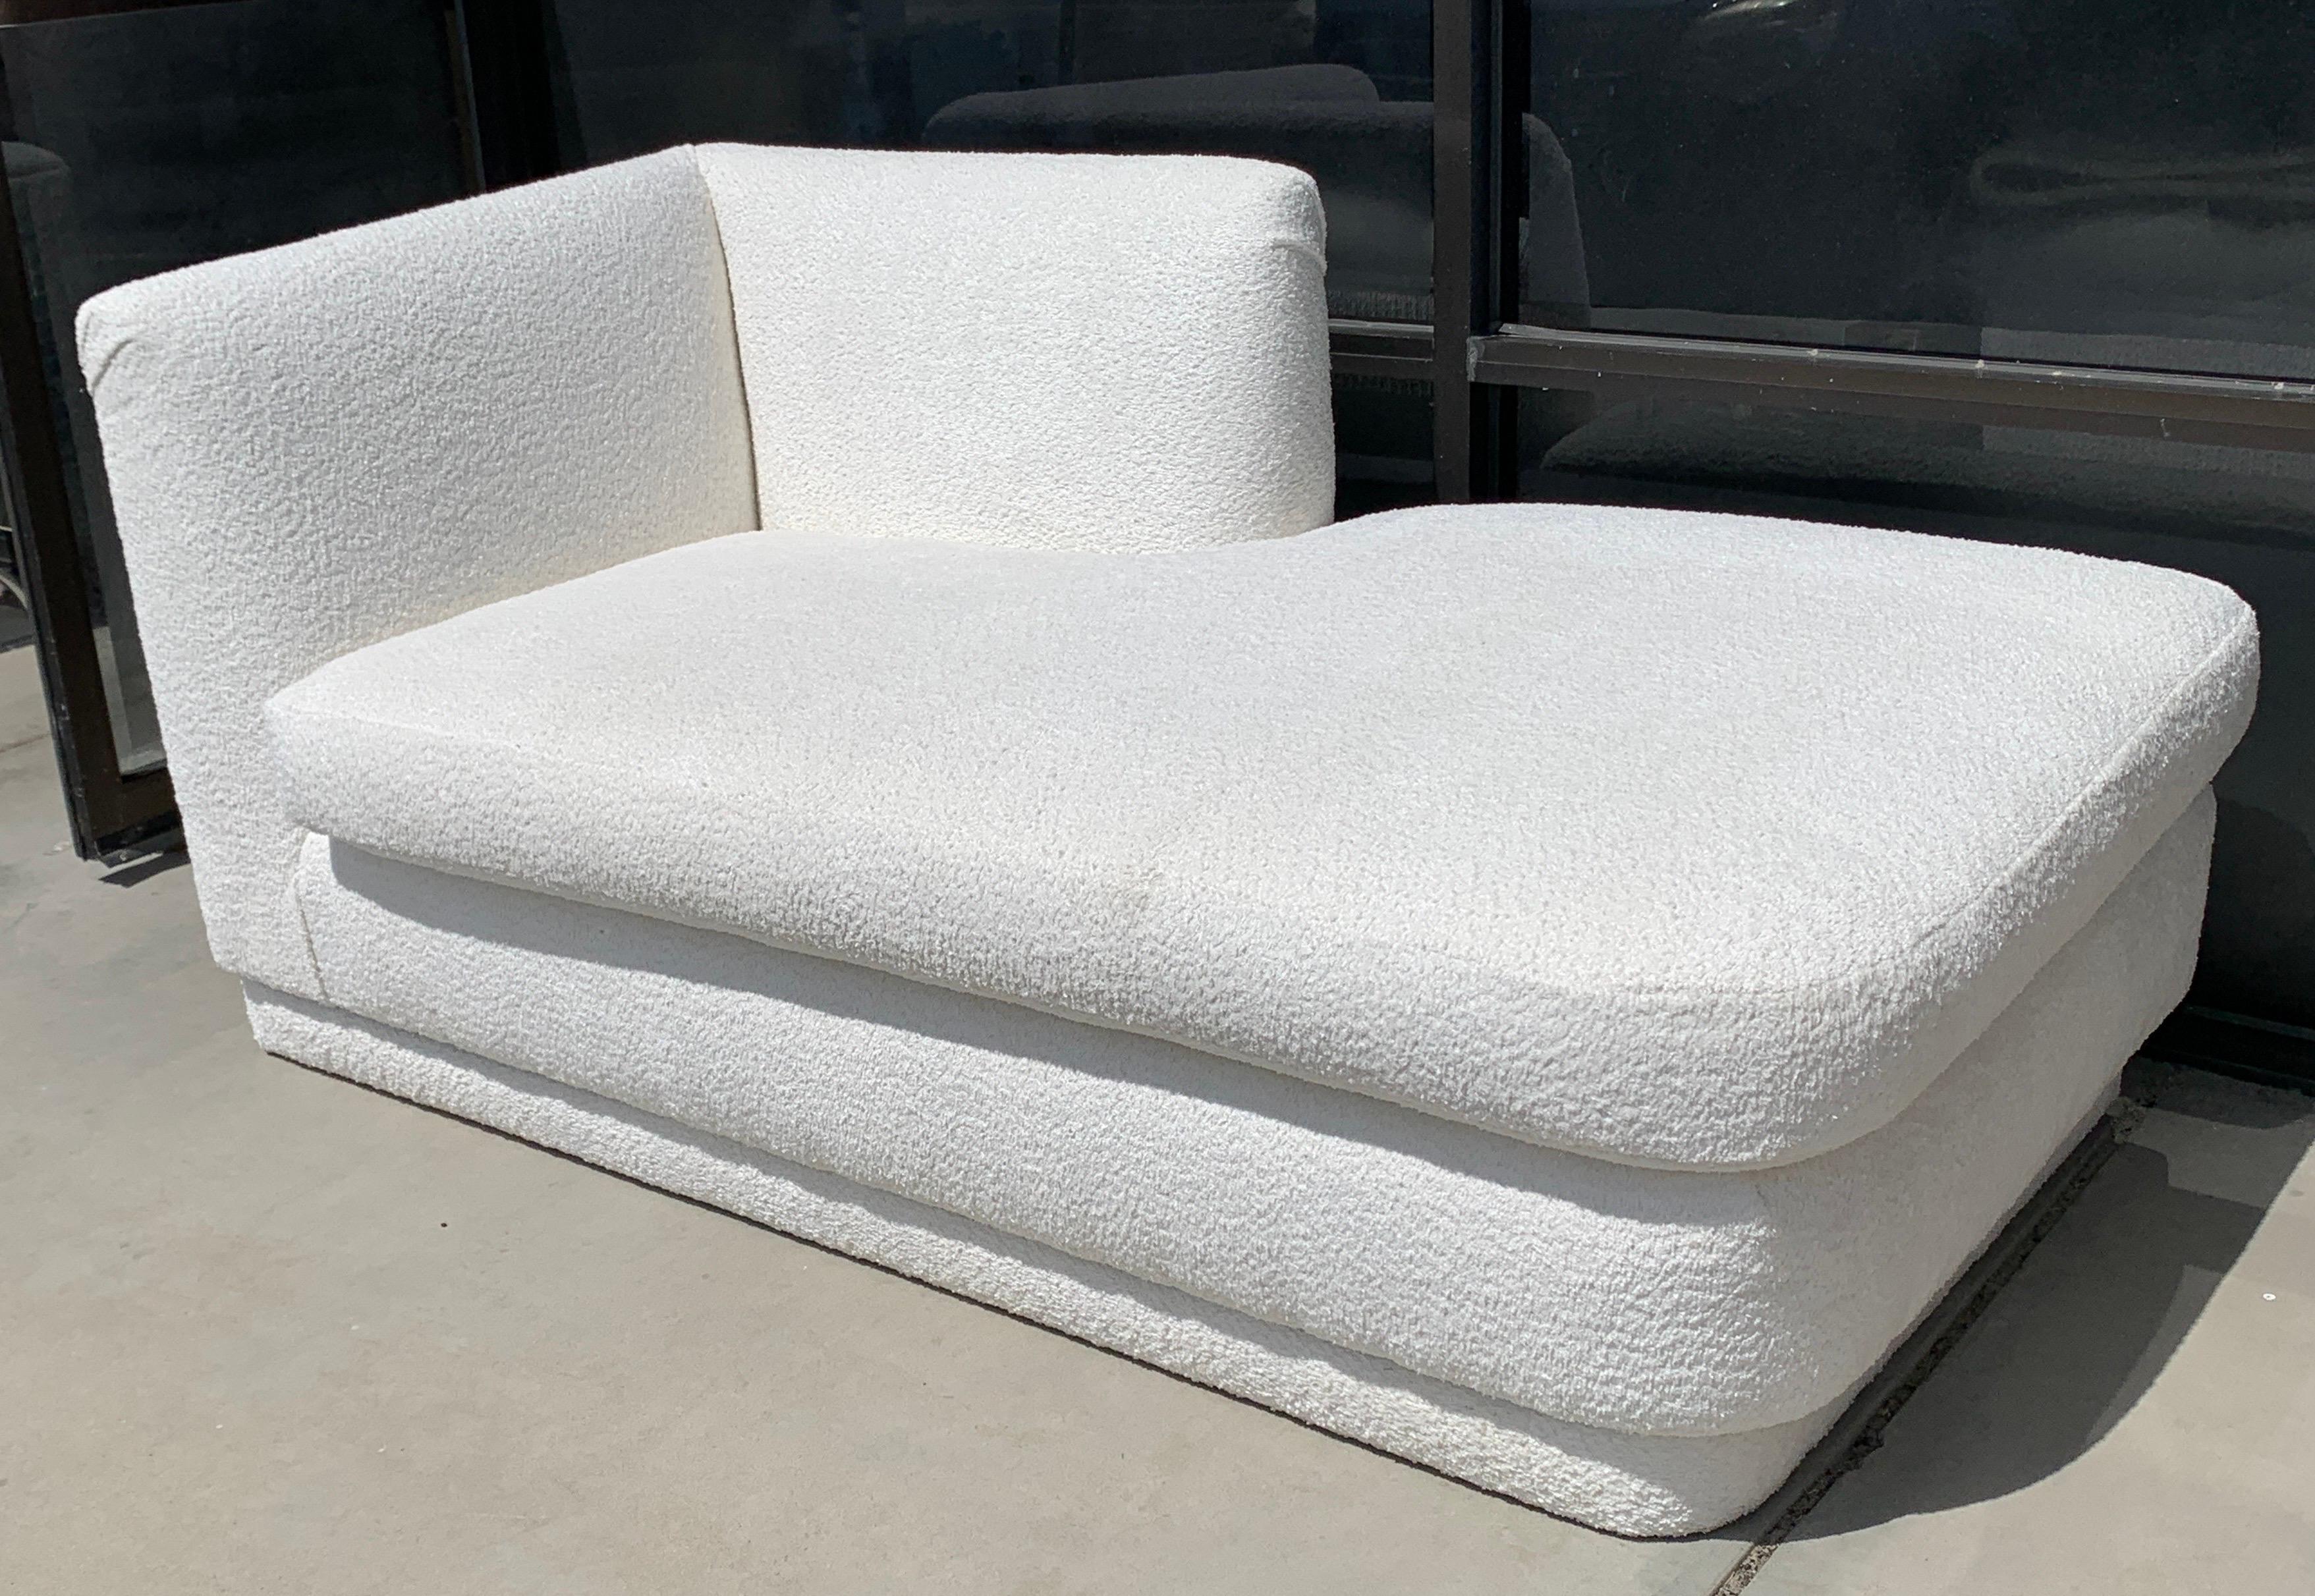 Steve Chaise Off-White Bouclé Chaise Lounge w/ Pair Matching Pillows In Excellent Condition For Sale In Palm Springs, CA